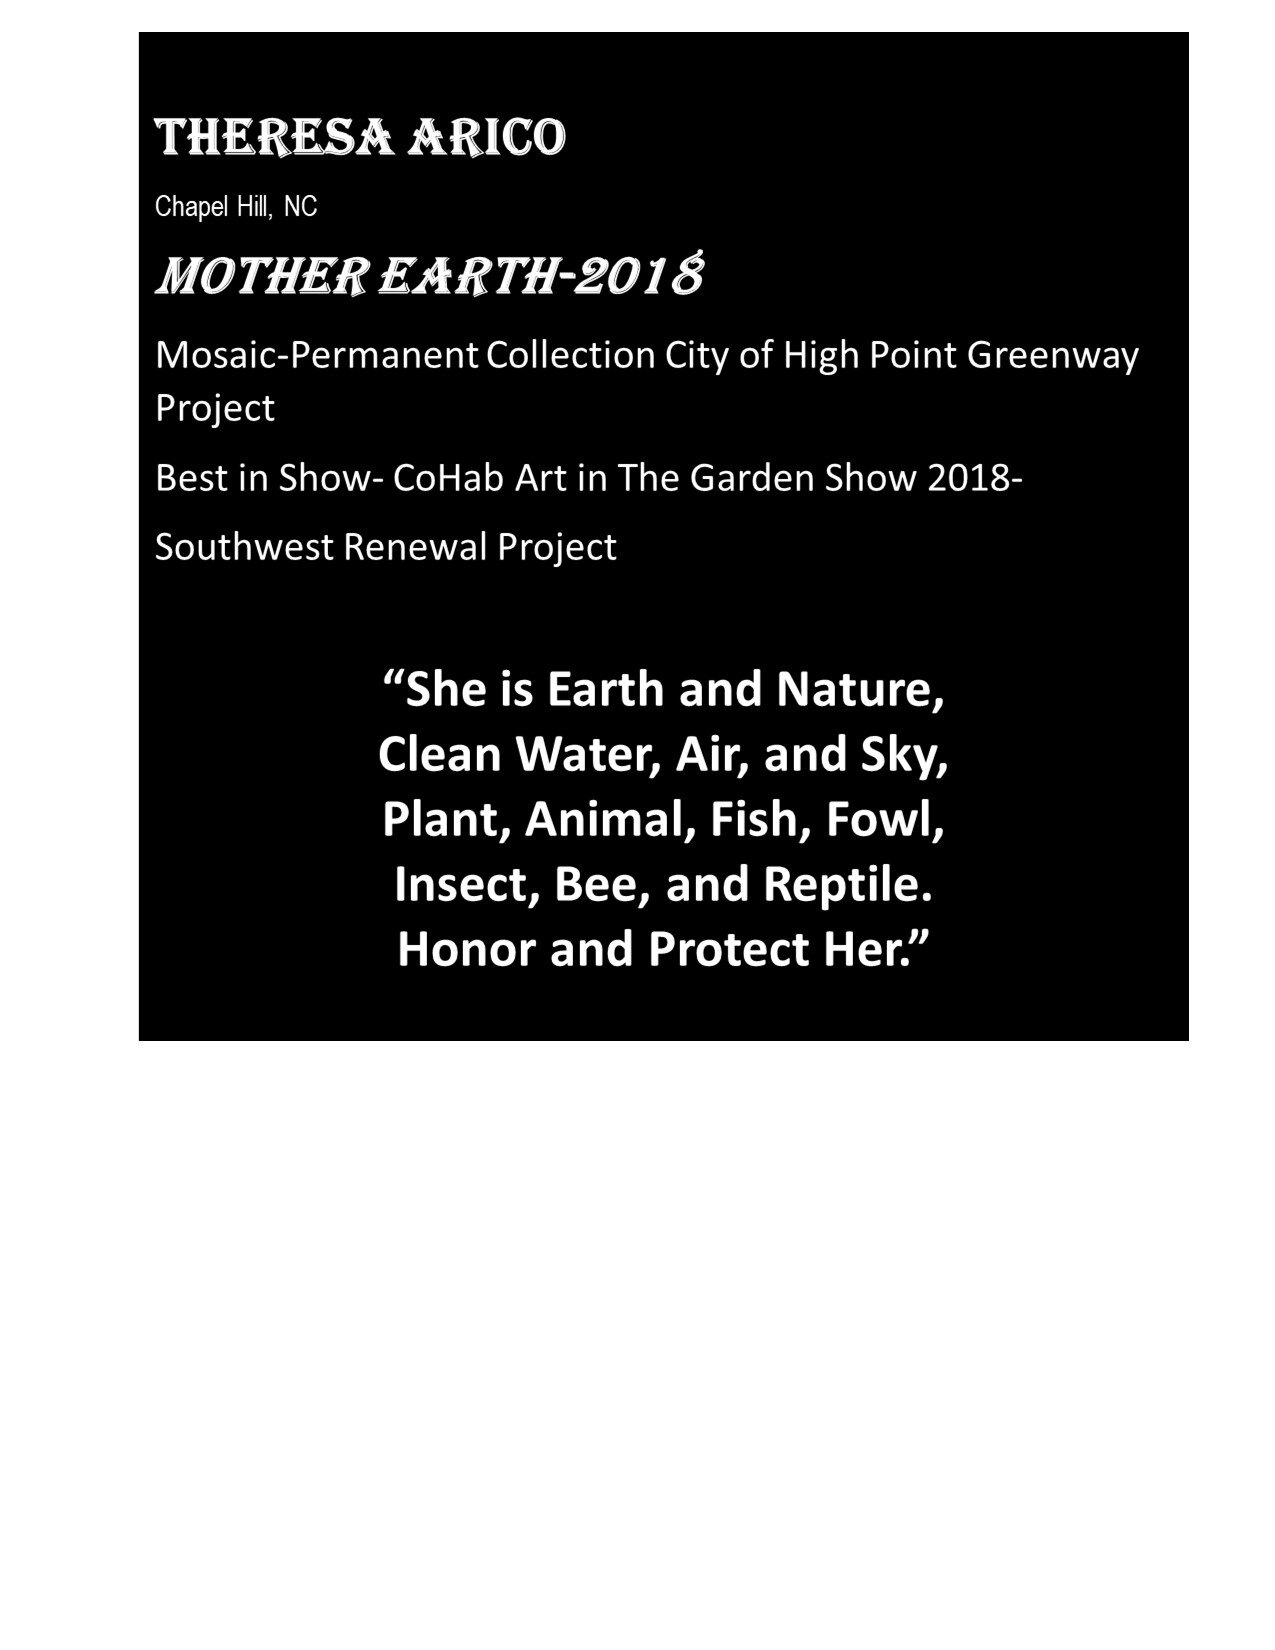 Mother Earth Placcard.jpg